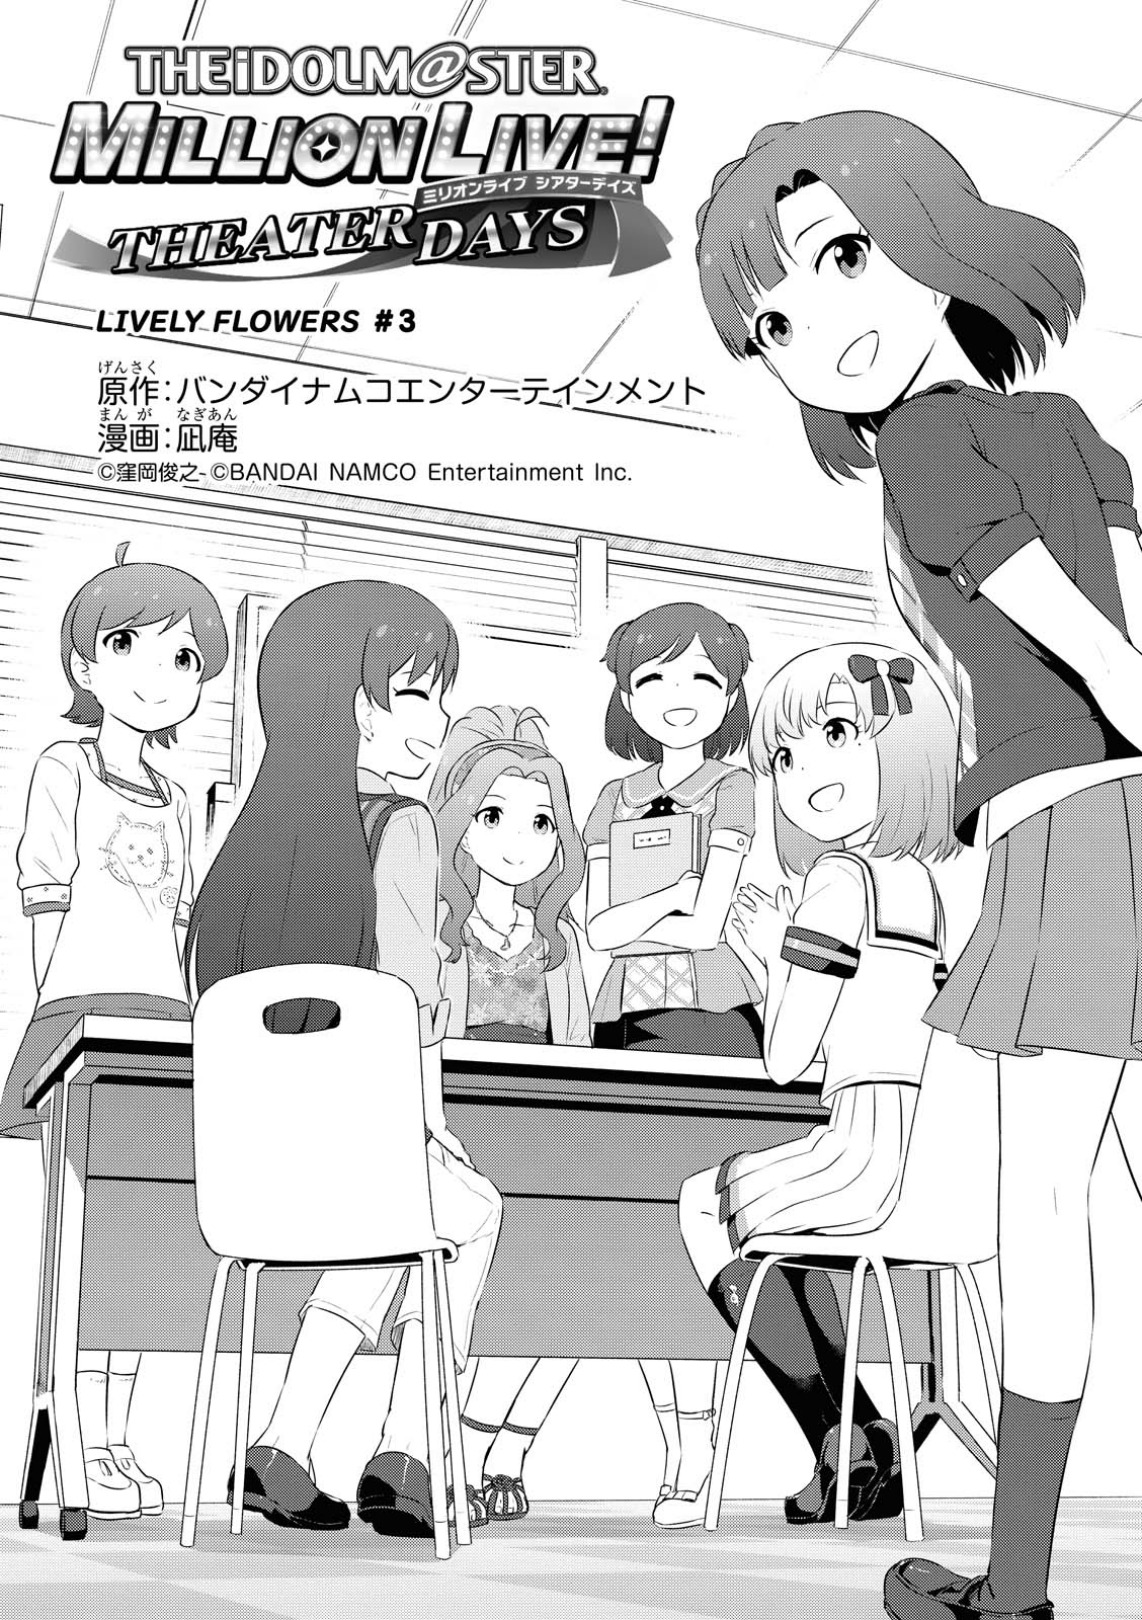 THE iDOLM@STER Million Live! Theater Days - LIVELY FLOWERS ch.3